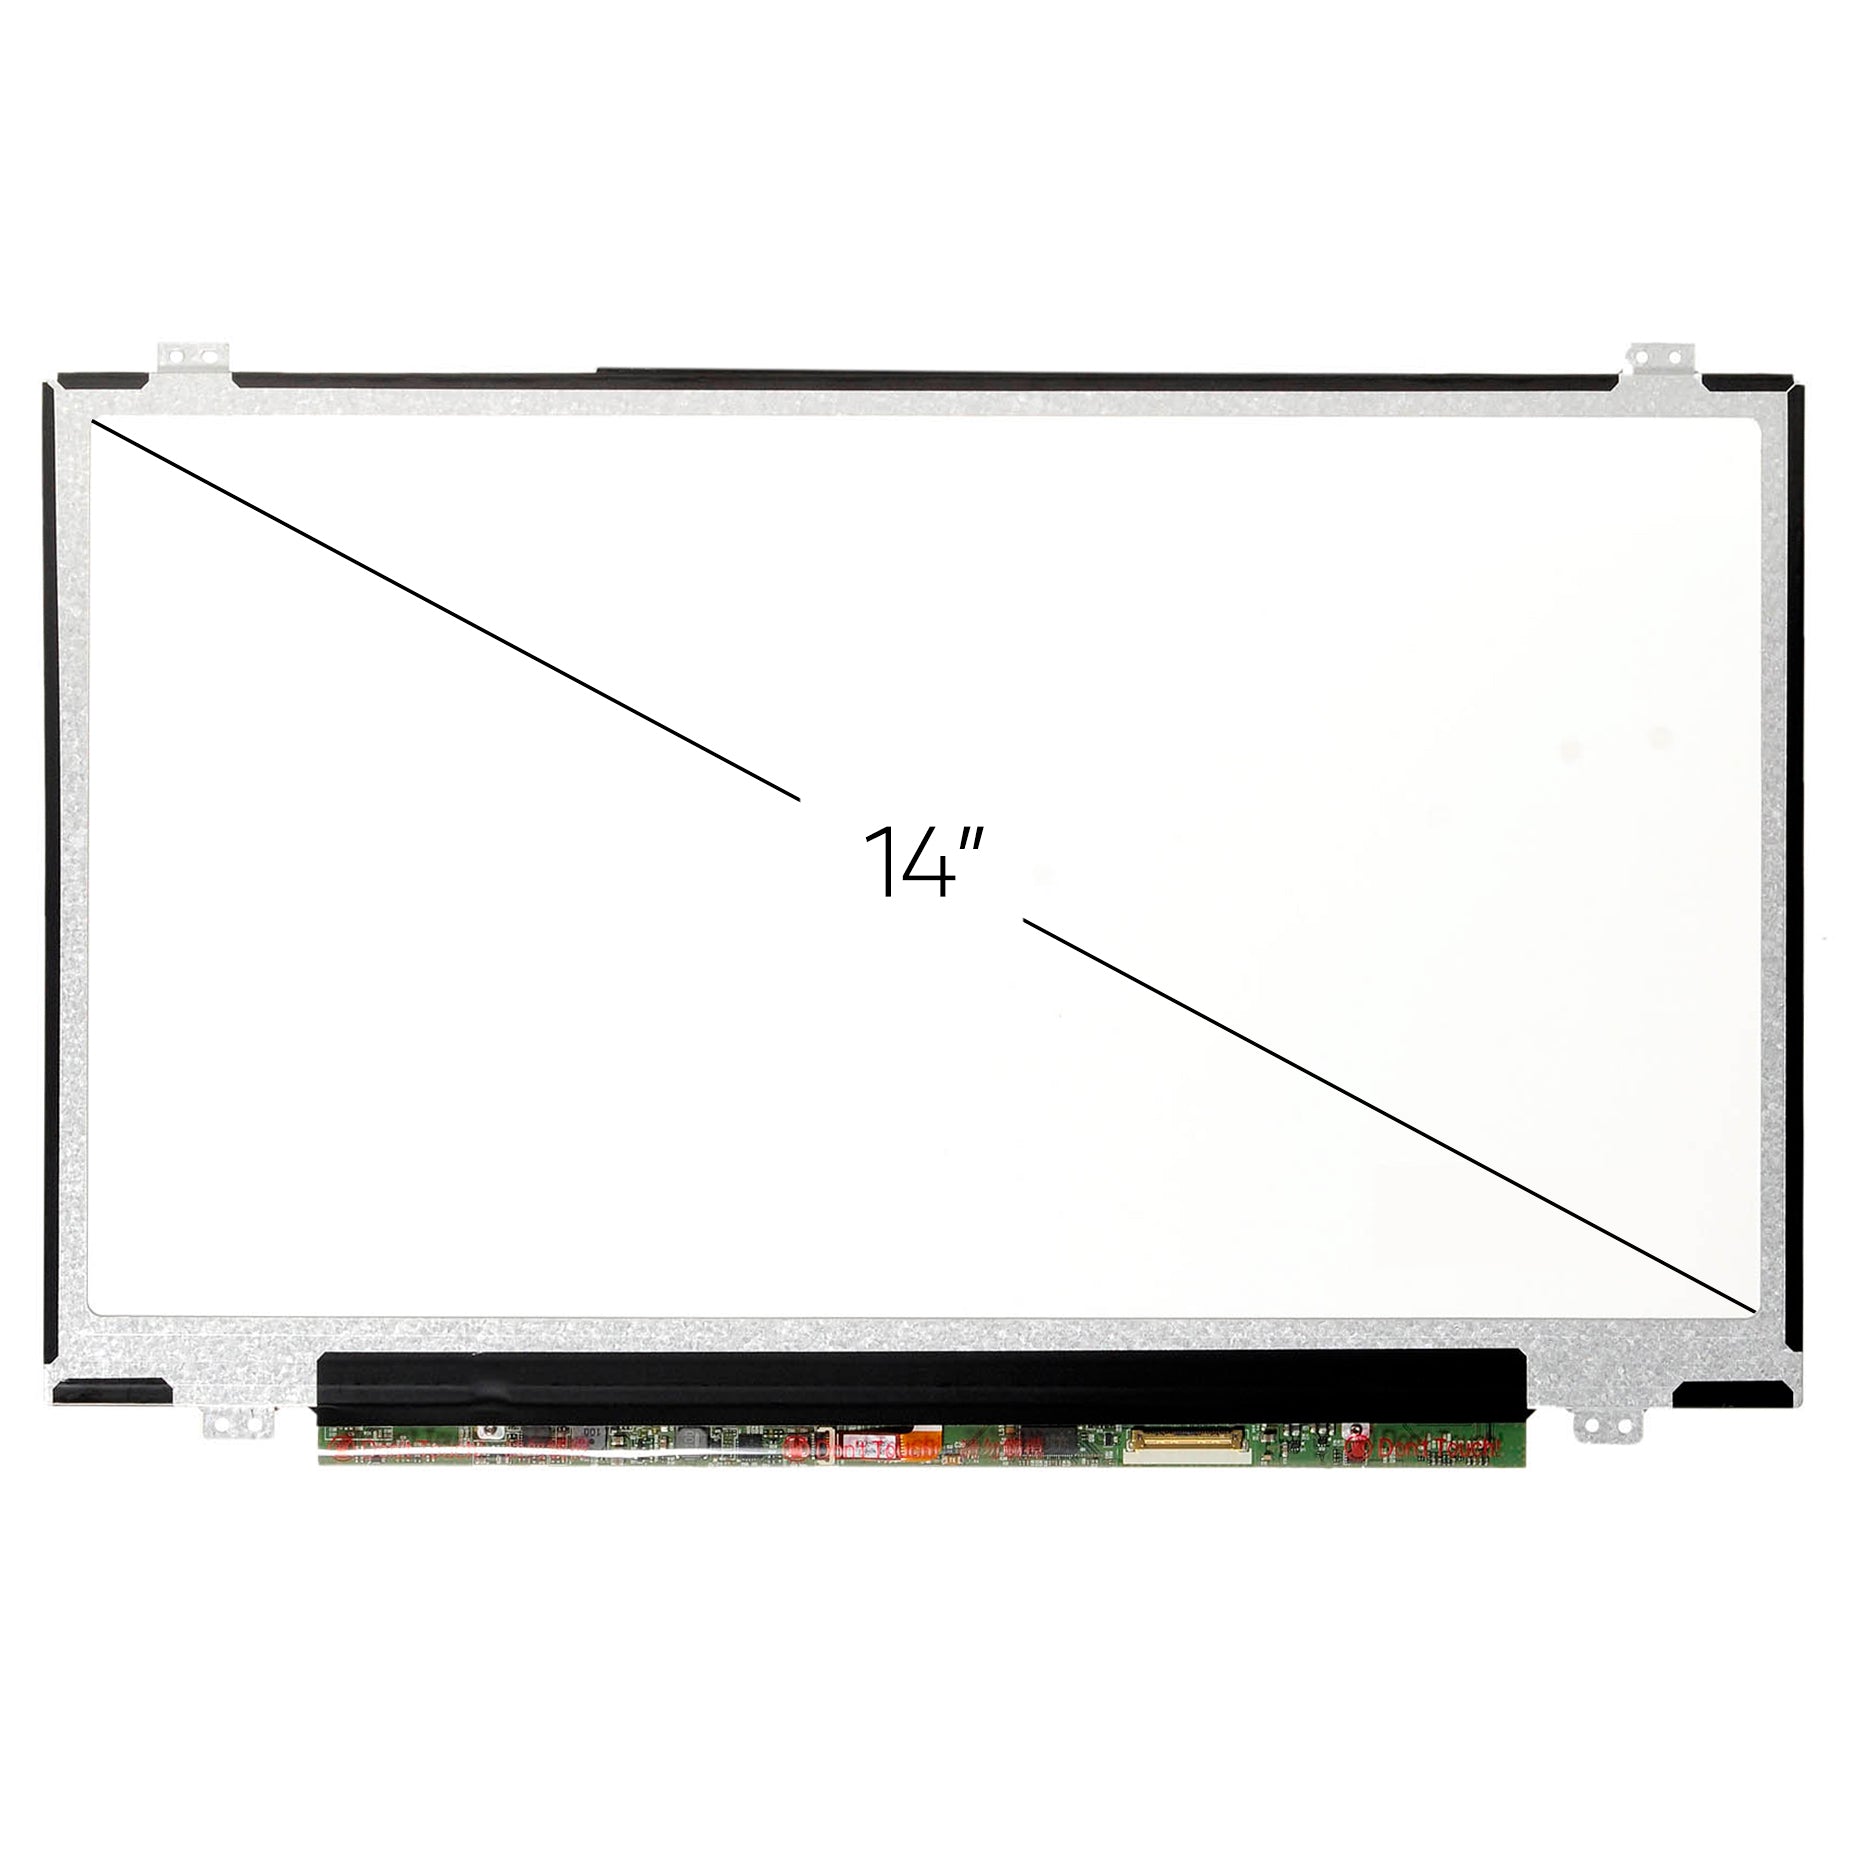 Screen Replacement for Lenovo Y40-70 FHD 1920x1080 IPS Matte LCD LED Display